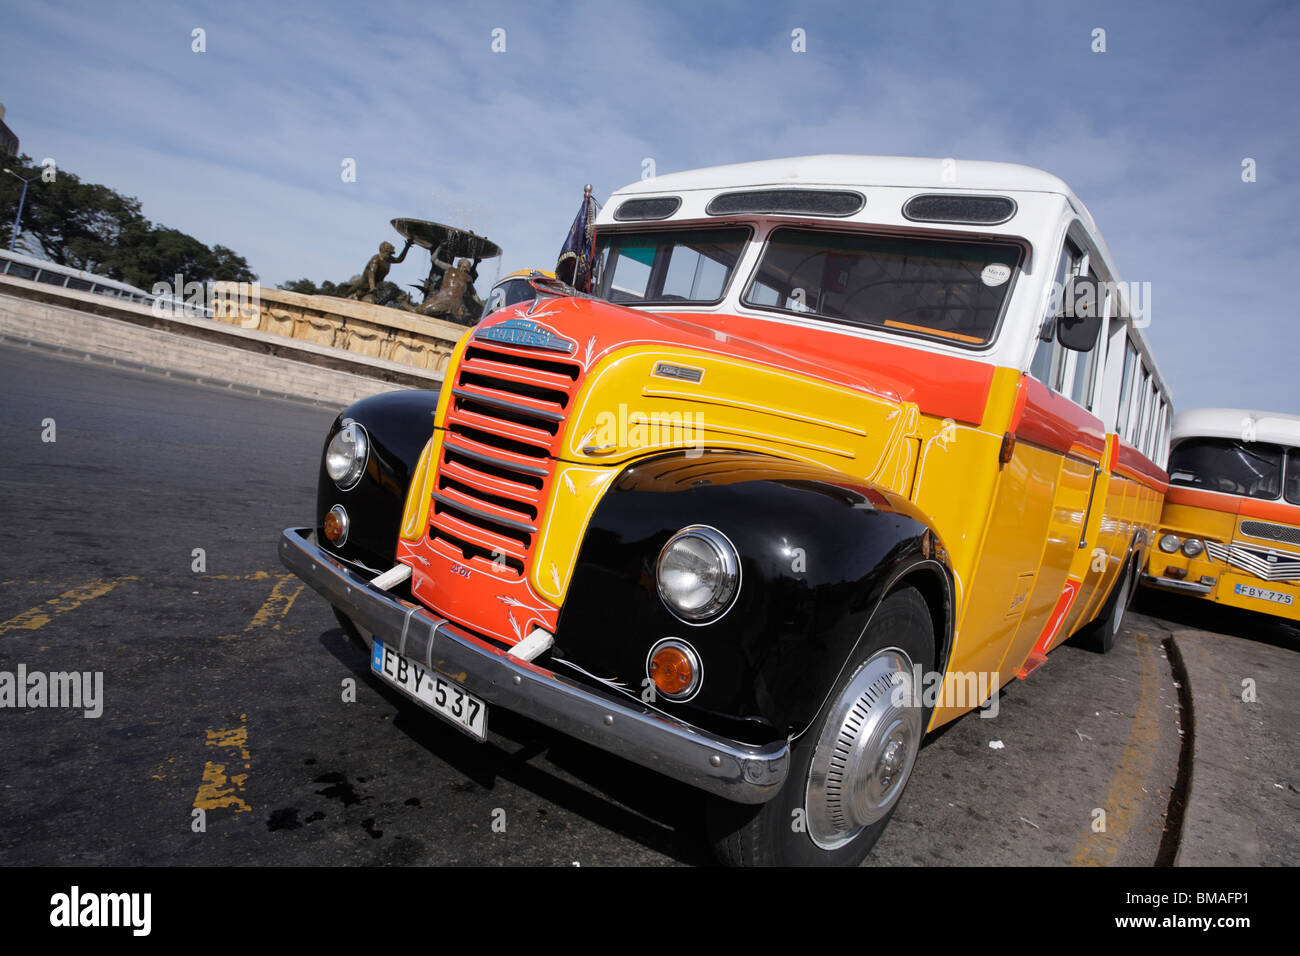 An old fashioned 'bull-nose' bus brightly painted yellow red & white located by the Triton fountain central bus station Malta Stock Photo